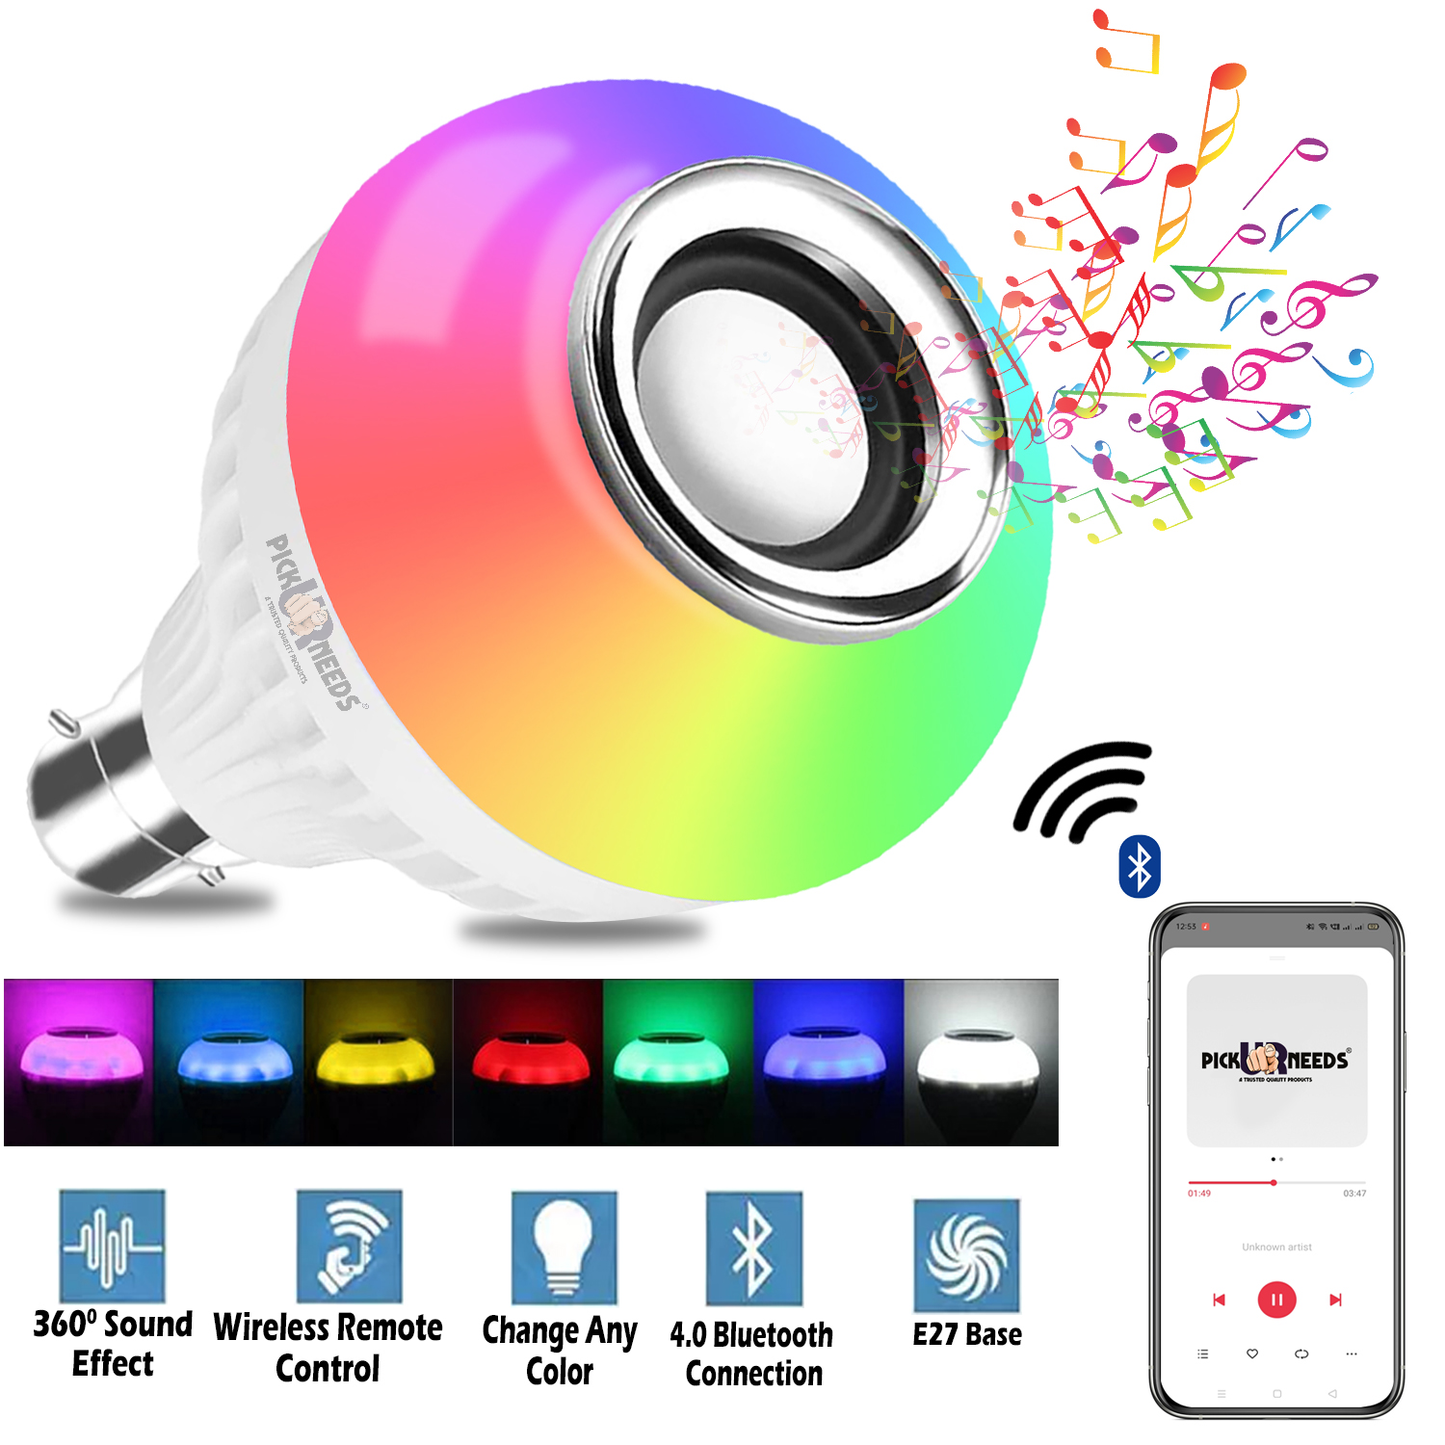 Pick Ur Needs® Bluetooth Speaker Smart Lighting Music Bulb Color Changing with Remote Control (Pack of 2)